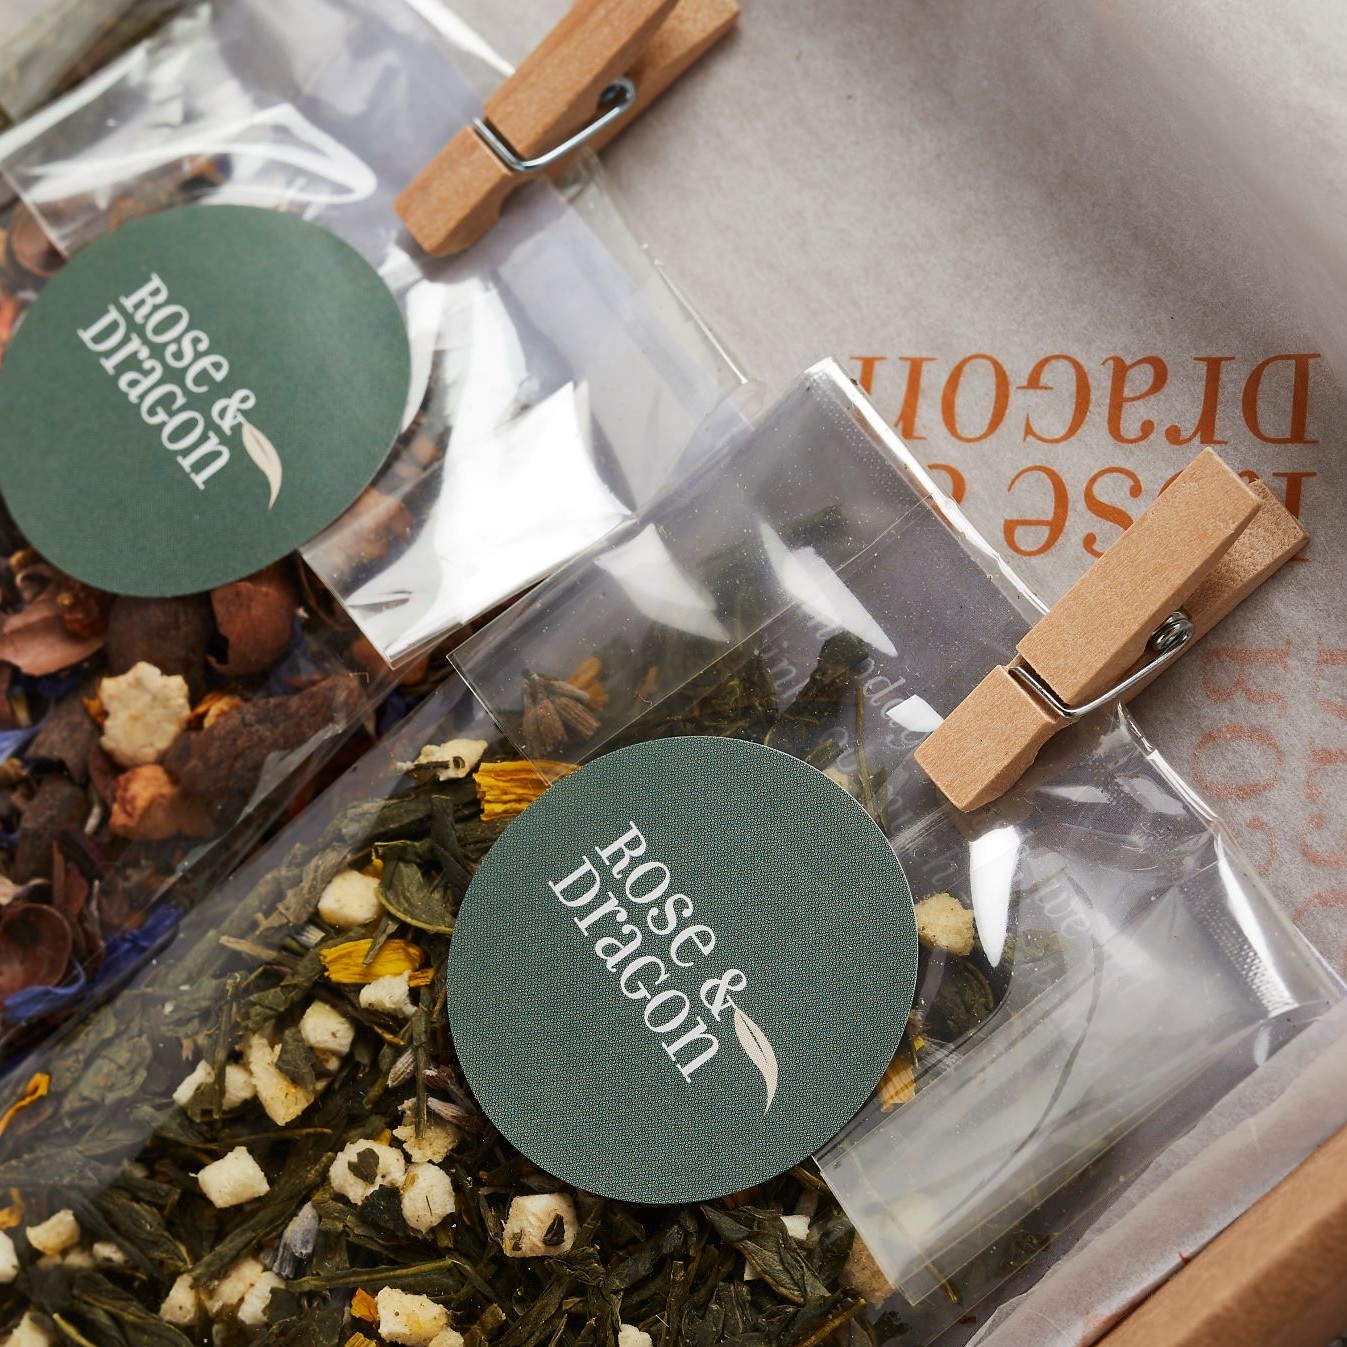 30013471347864-rose-and-dragon-tea-herbal-green-and-black-tea-subscription-packet-close-up.jpg